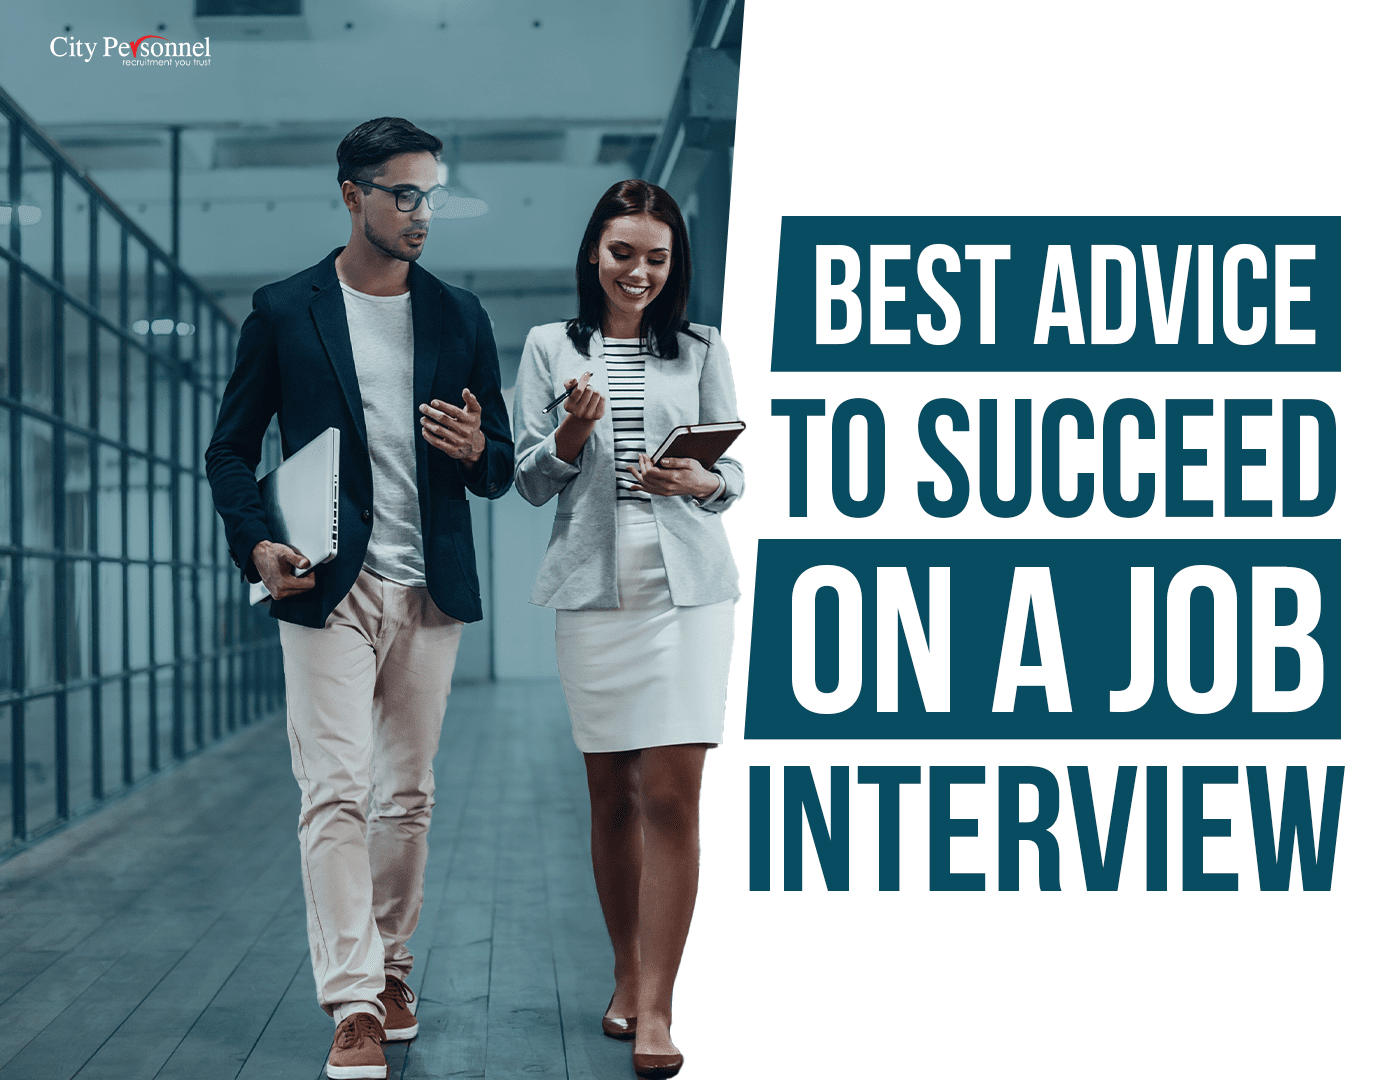 Best advice to succeed on a job interview